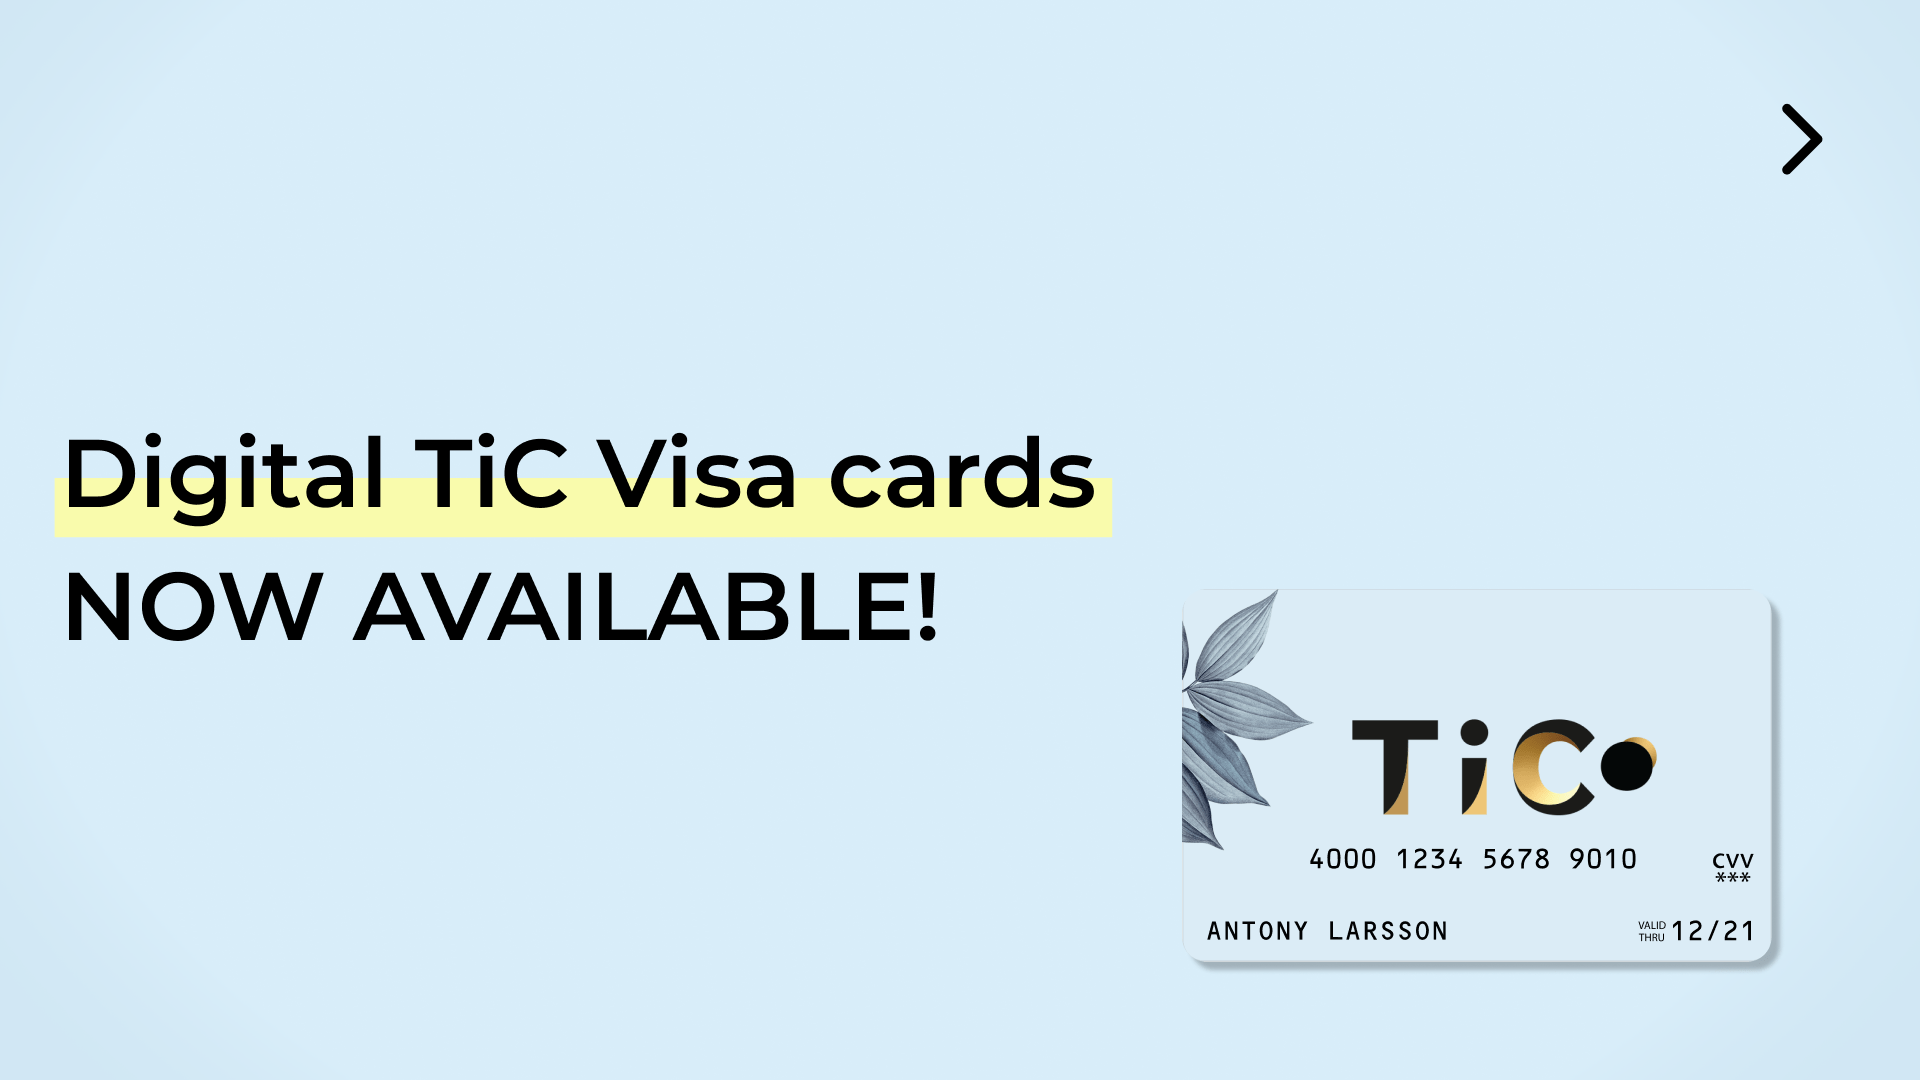 Digital TiC Visa cards NOW AVAILABLE!